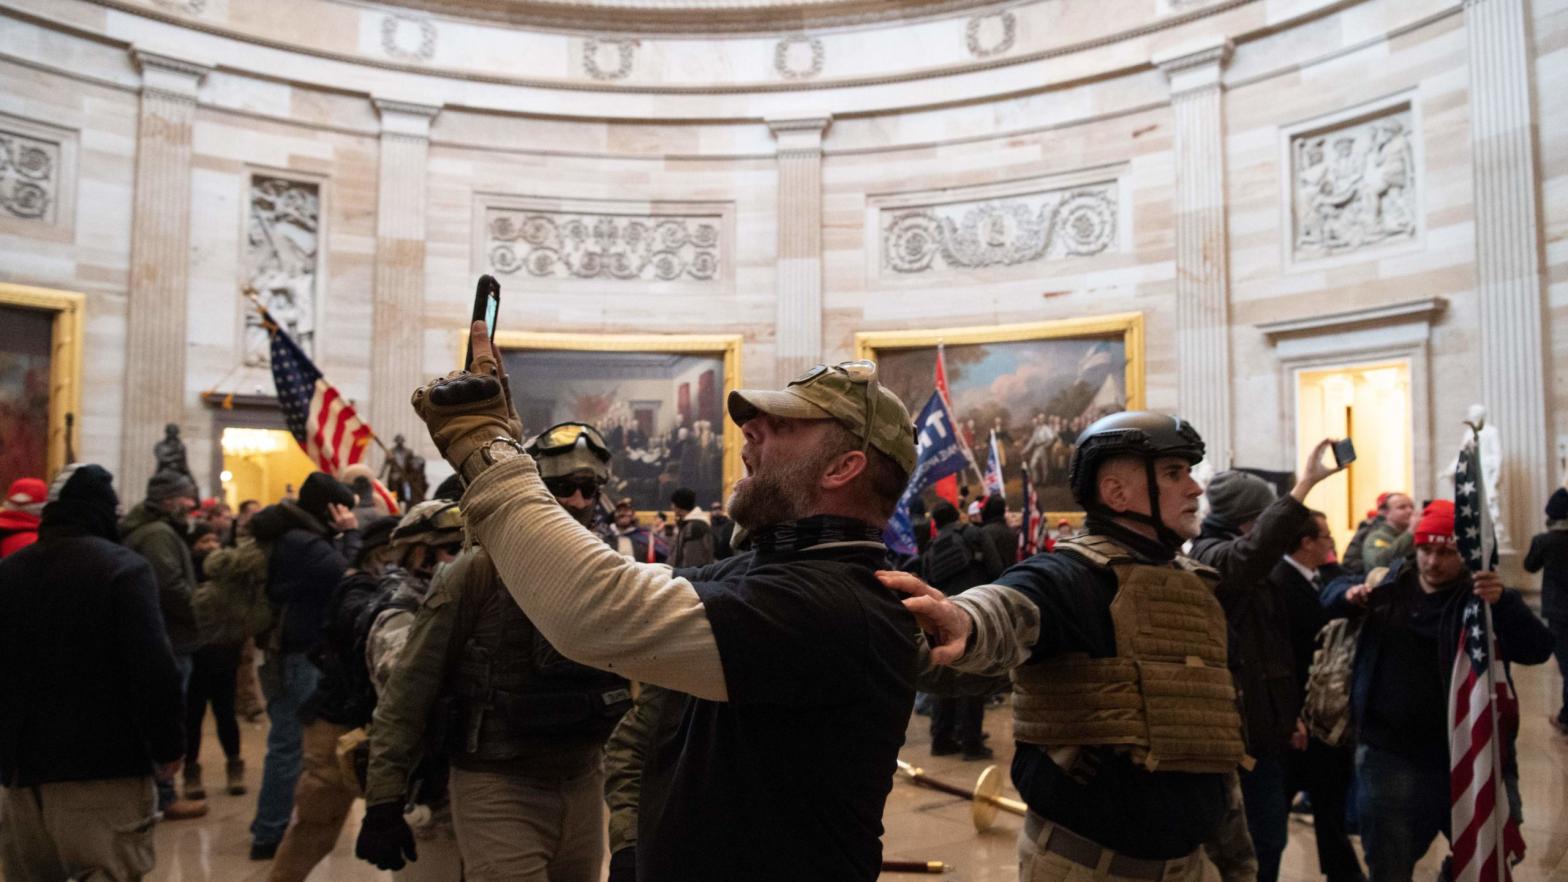 Extremists in the U.S. Capitol building after overrunning police. (Photo: Saul Loeb/AFP, Getty Images)